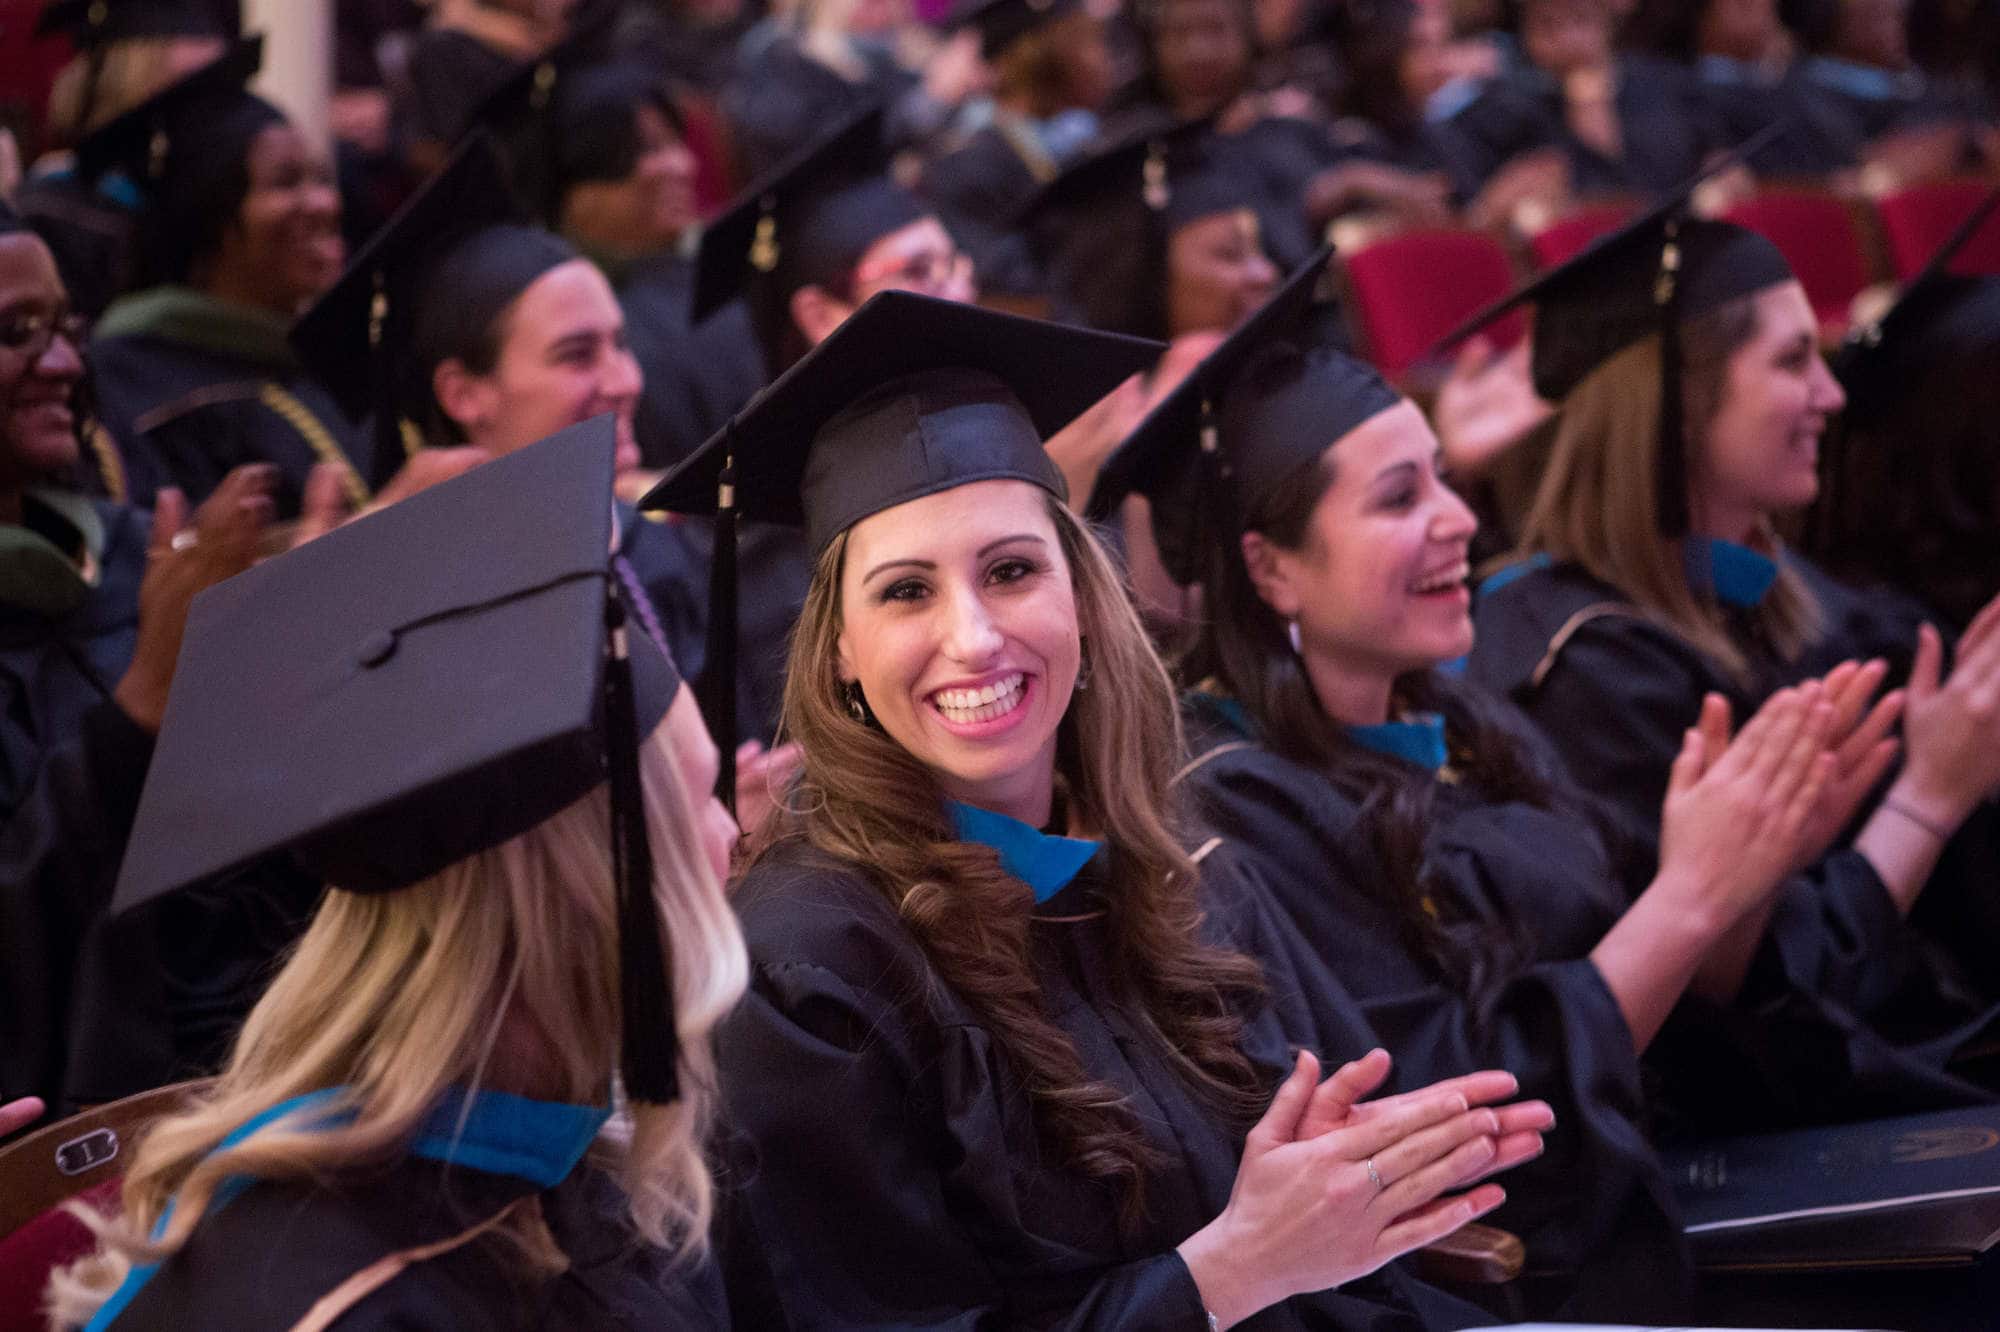 Occupational therapy graduates clap during a commencement ceremony